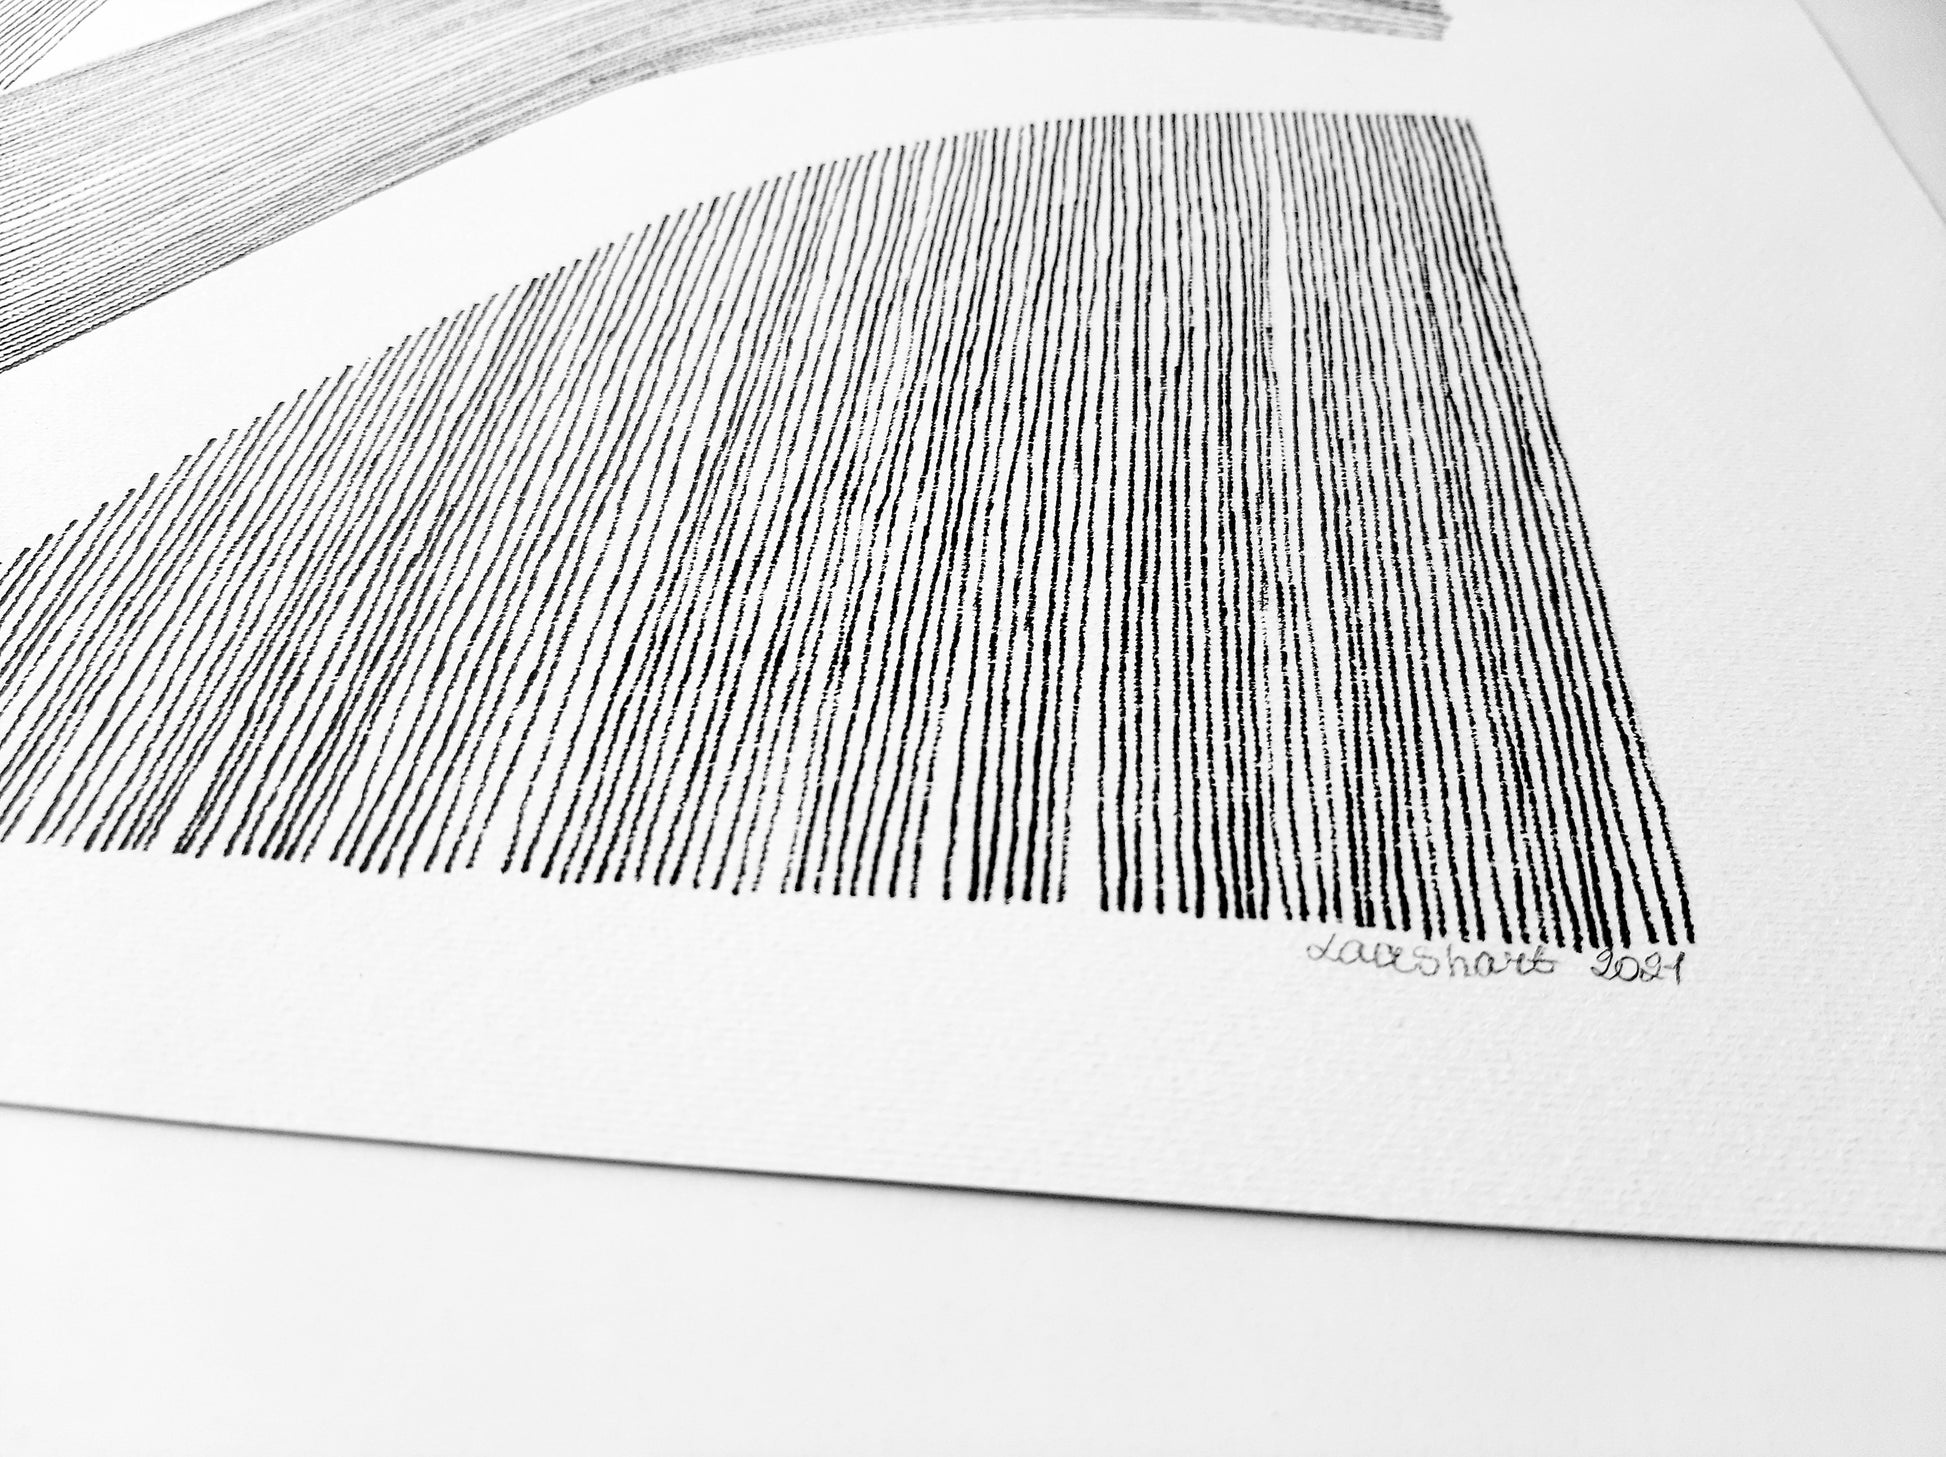 Details №3 Unique black and white Geometric abstract line drawing shapes artwork 